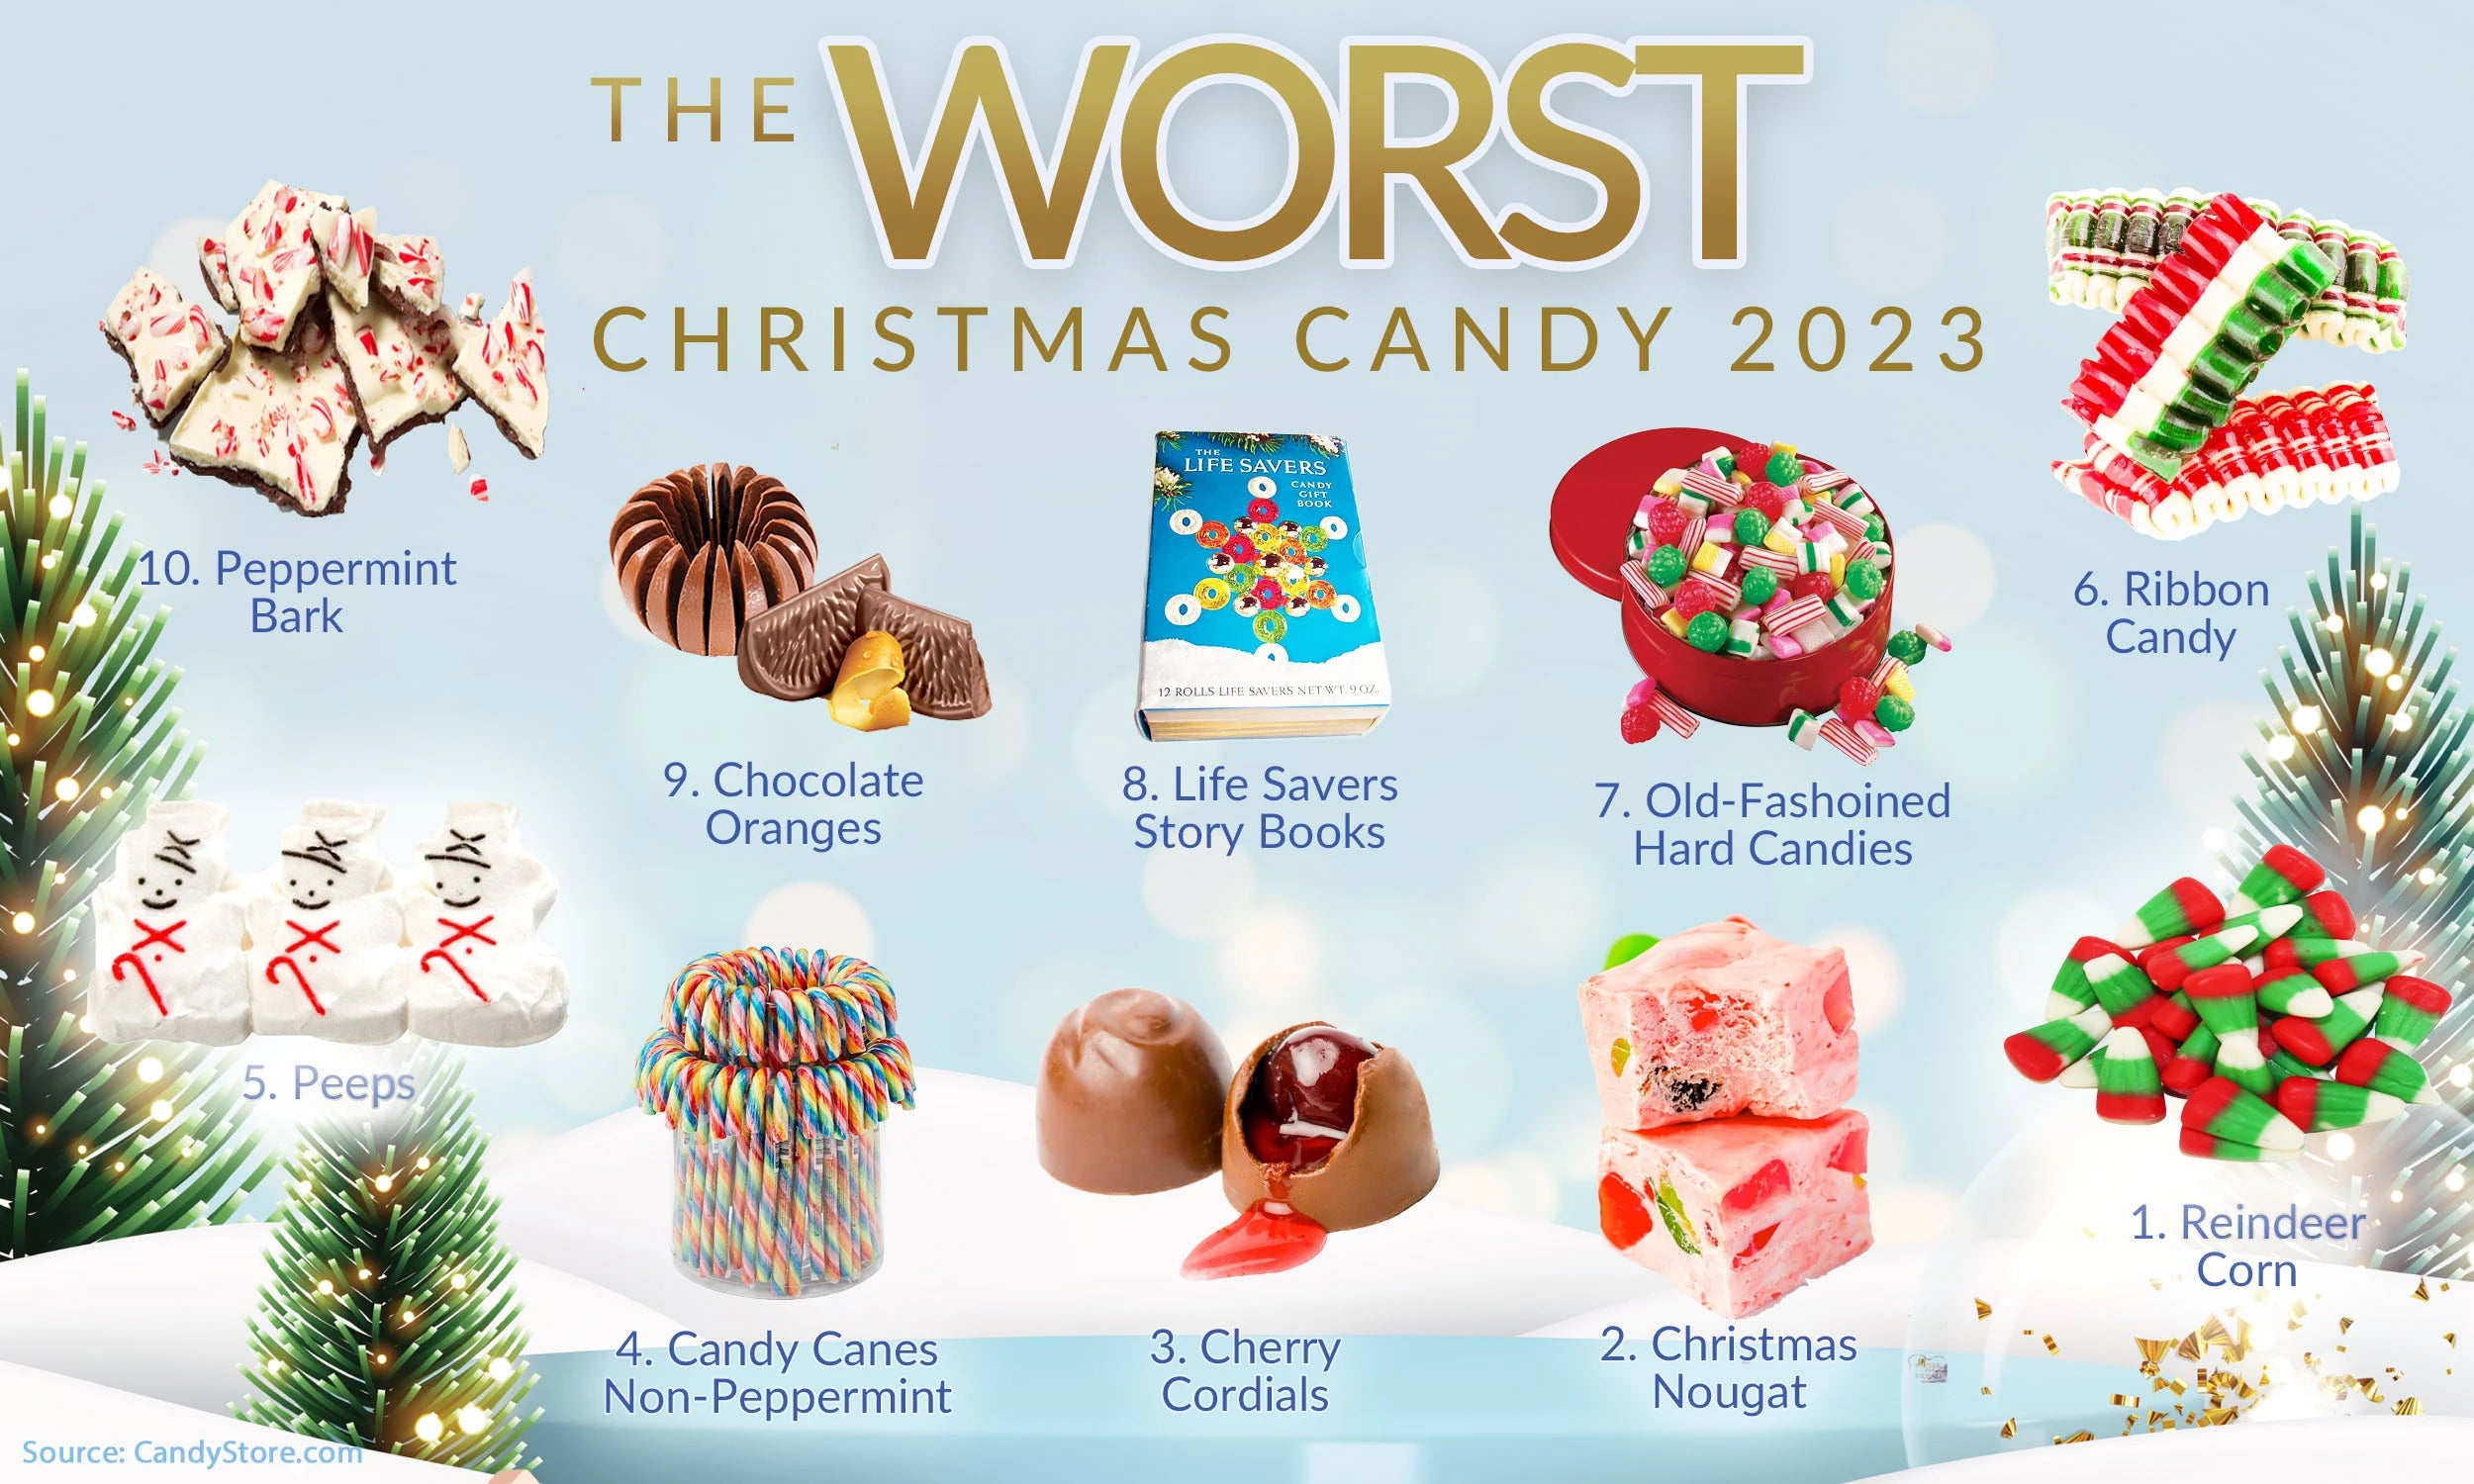 The WORST Christmas Holiday Candy